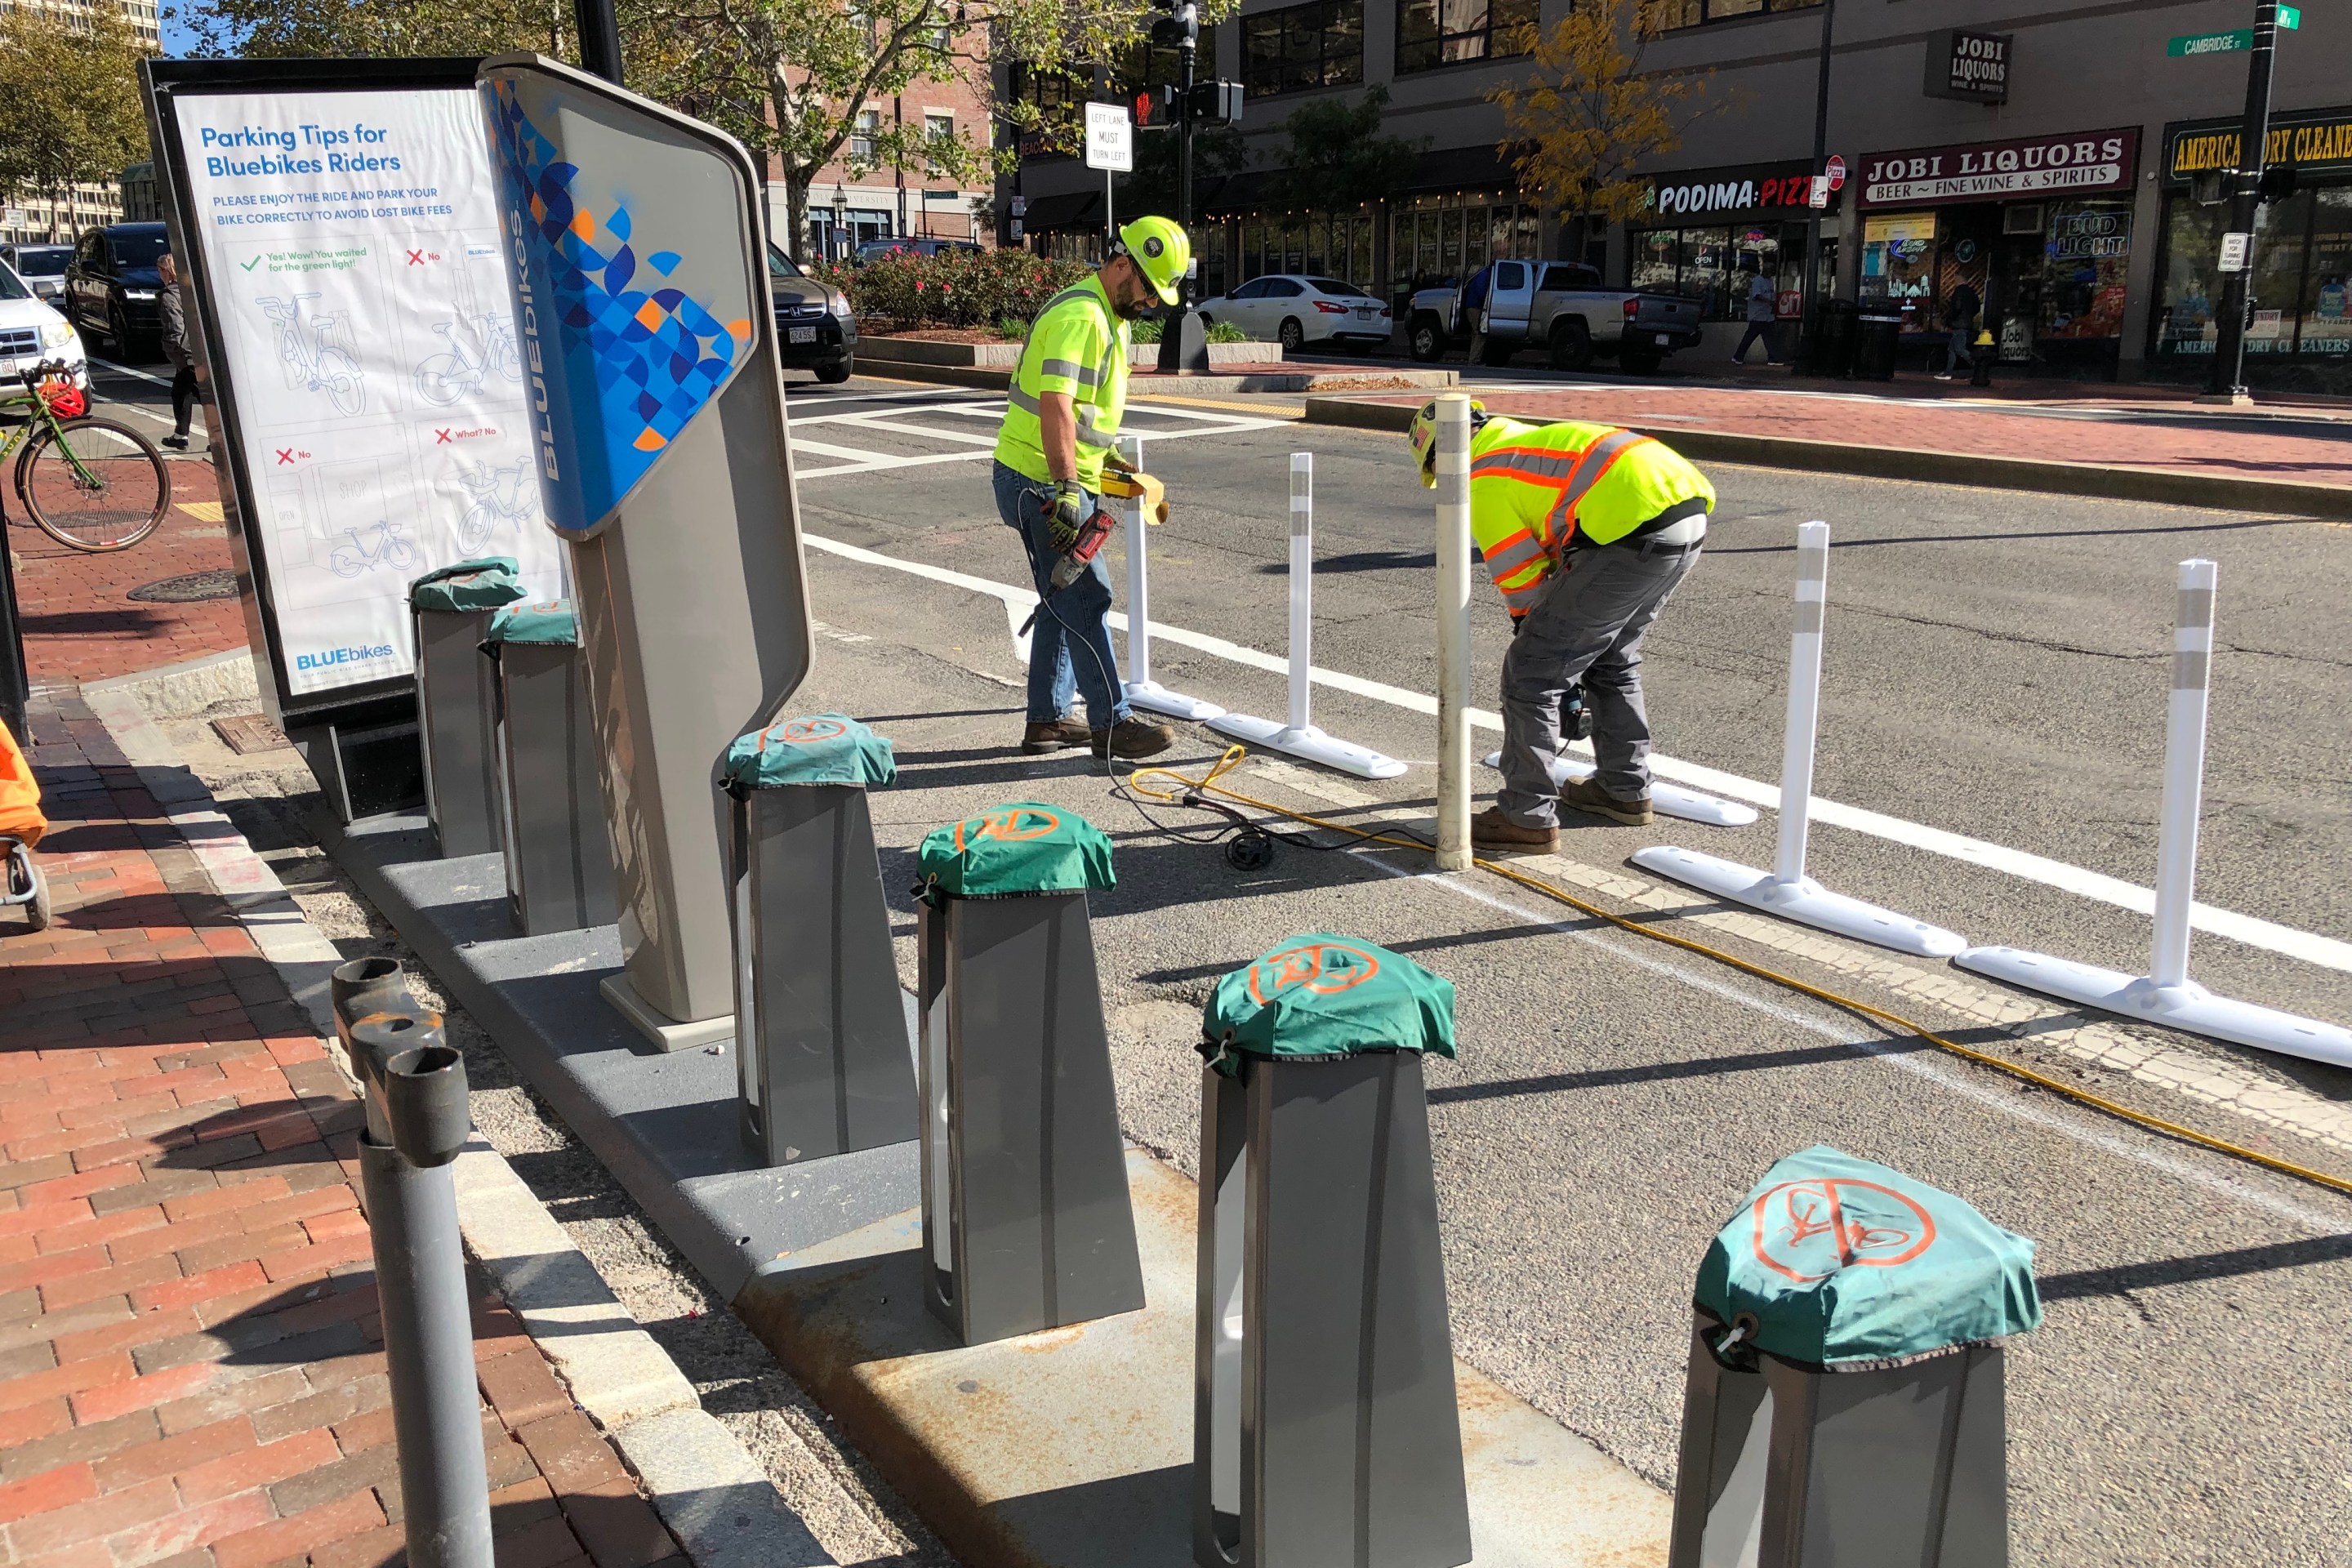 Boston Transportation Department workers in bright yellow vests install flexible-post bollards for the new Cambridge Street bike lane next to an empty Bluebikes dock.